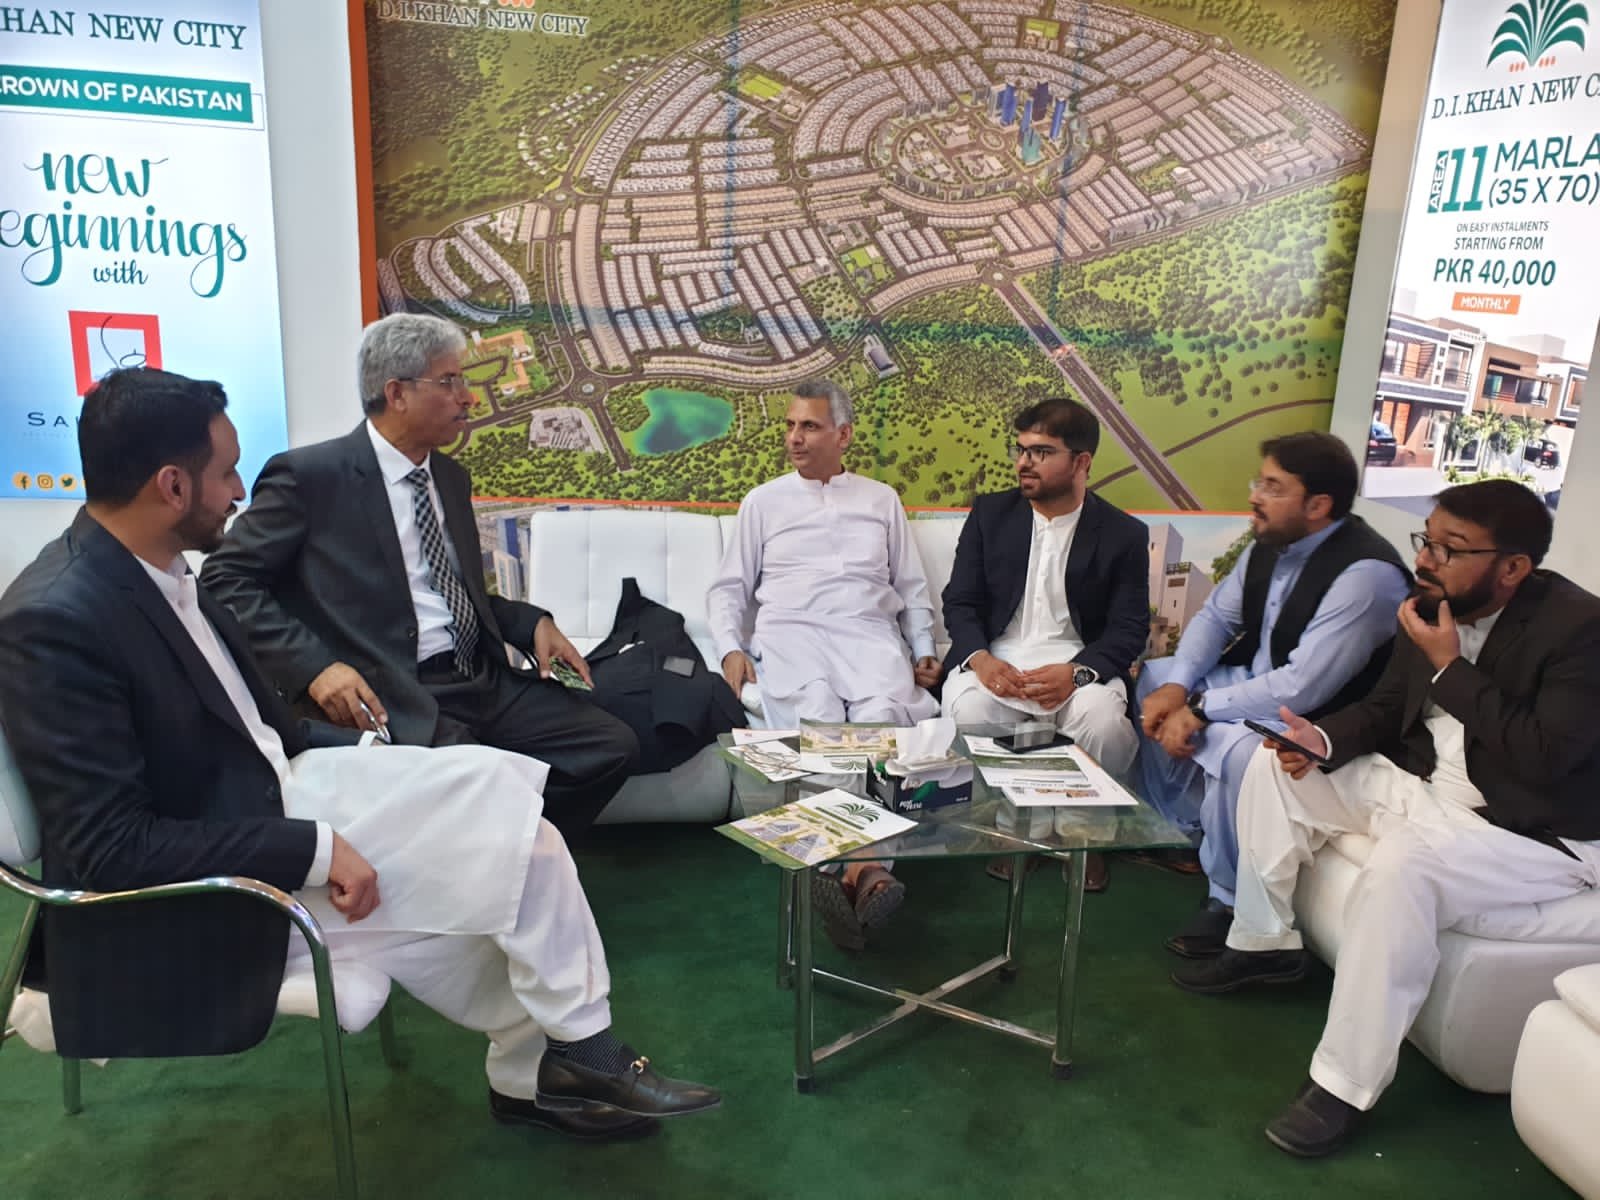 Amin Hafeez, renowned journalist of #Pakistan, visited #dikhannewcity stall at the #Quetta Property Expo